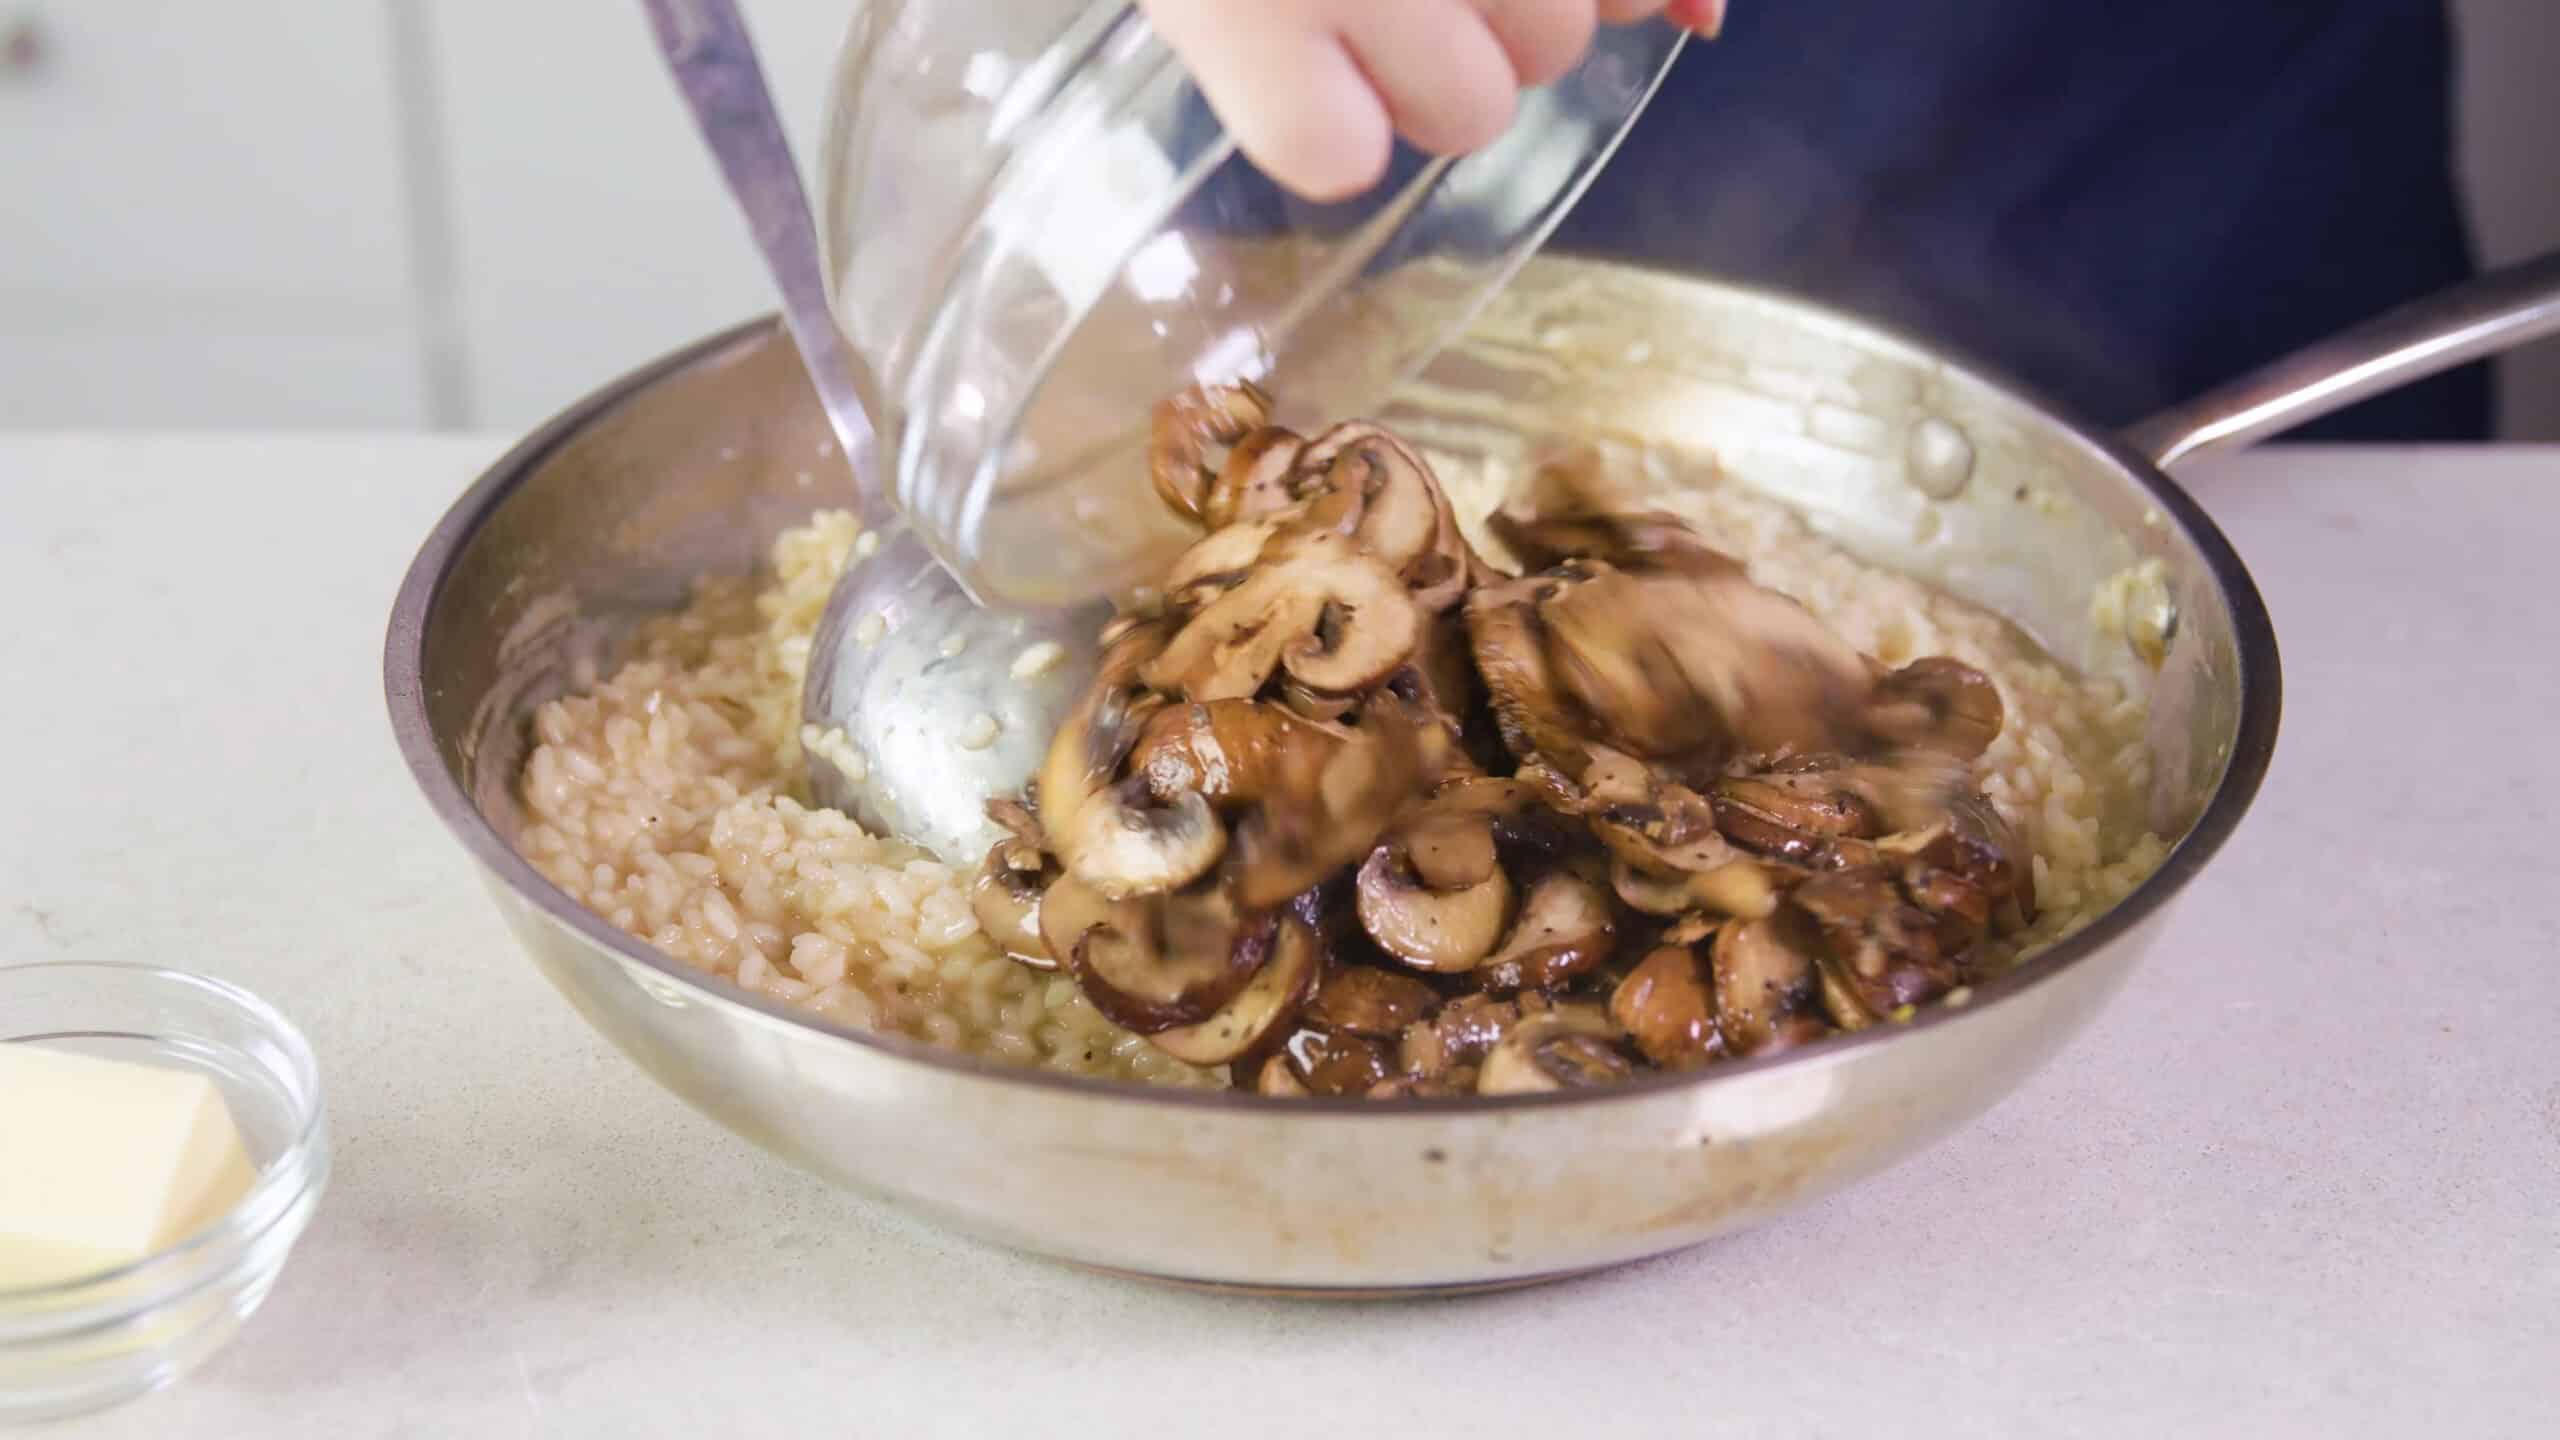 Silver saucepan on a countertop filled with cooked risotto and a large mixing bowl pouring sautéed mushrooms into the risotto mixture.